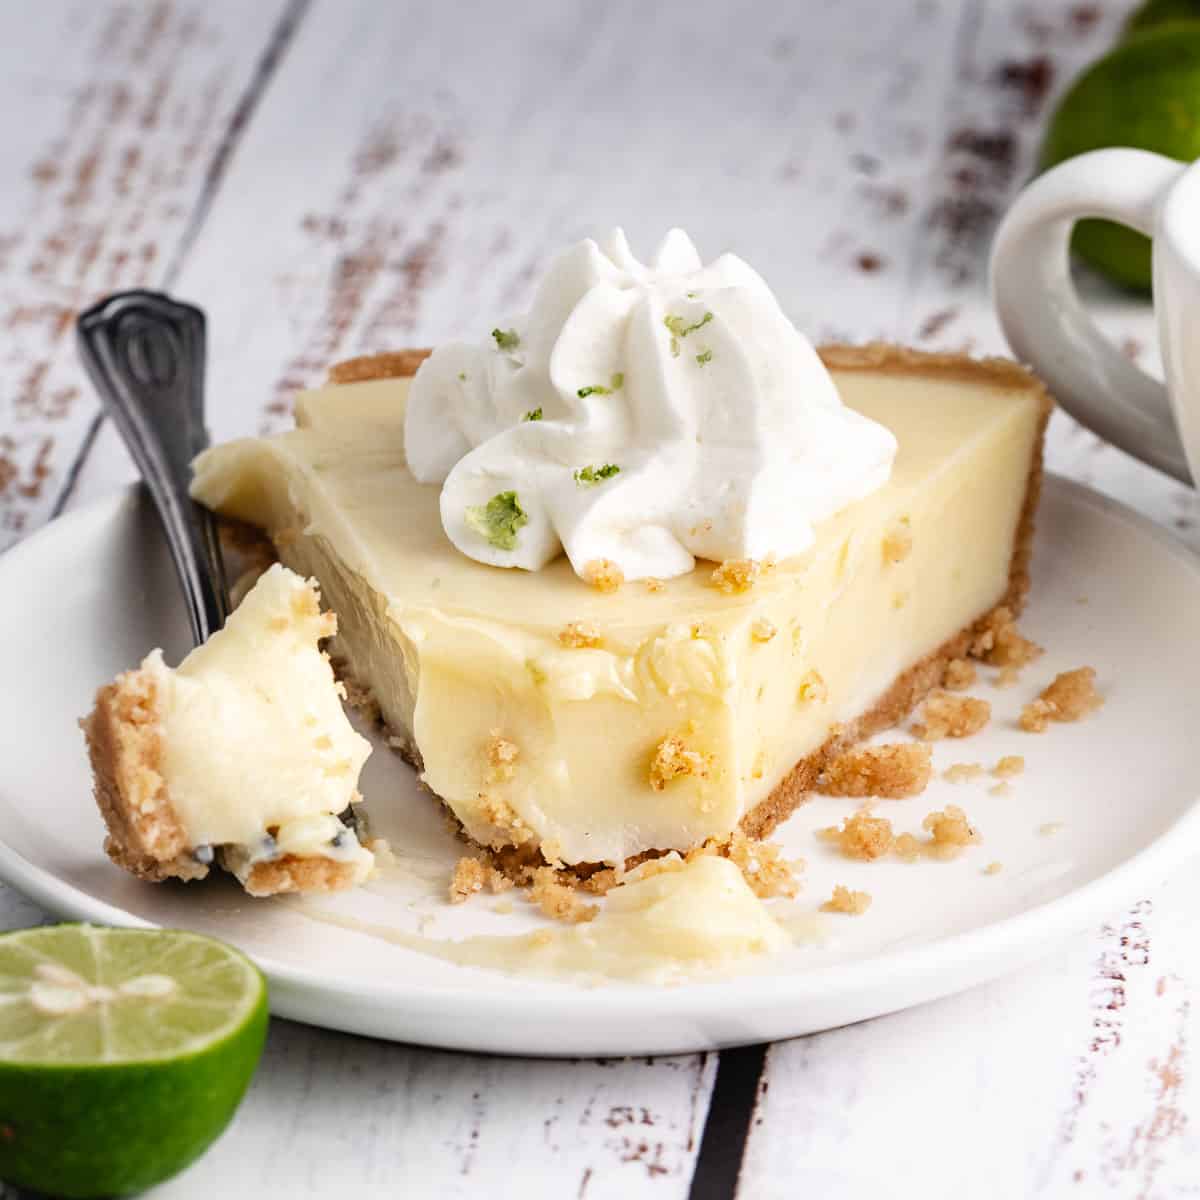 Key lime pie with whipped cream.